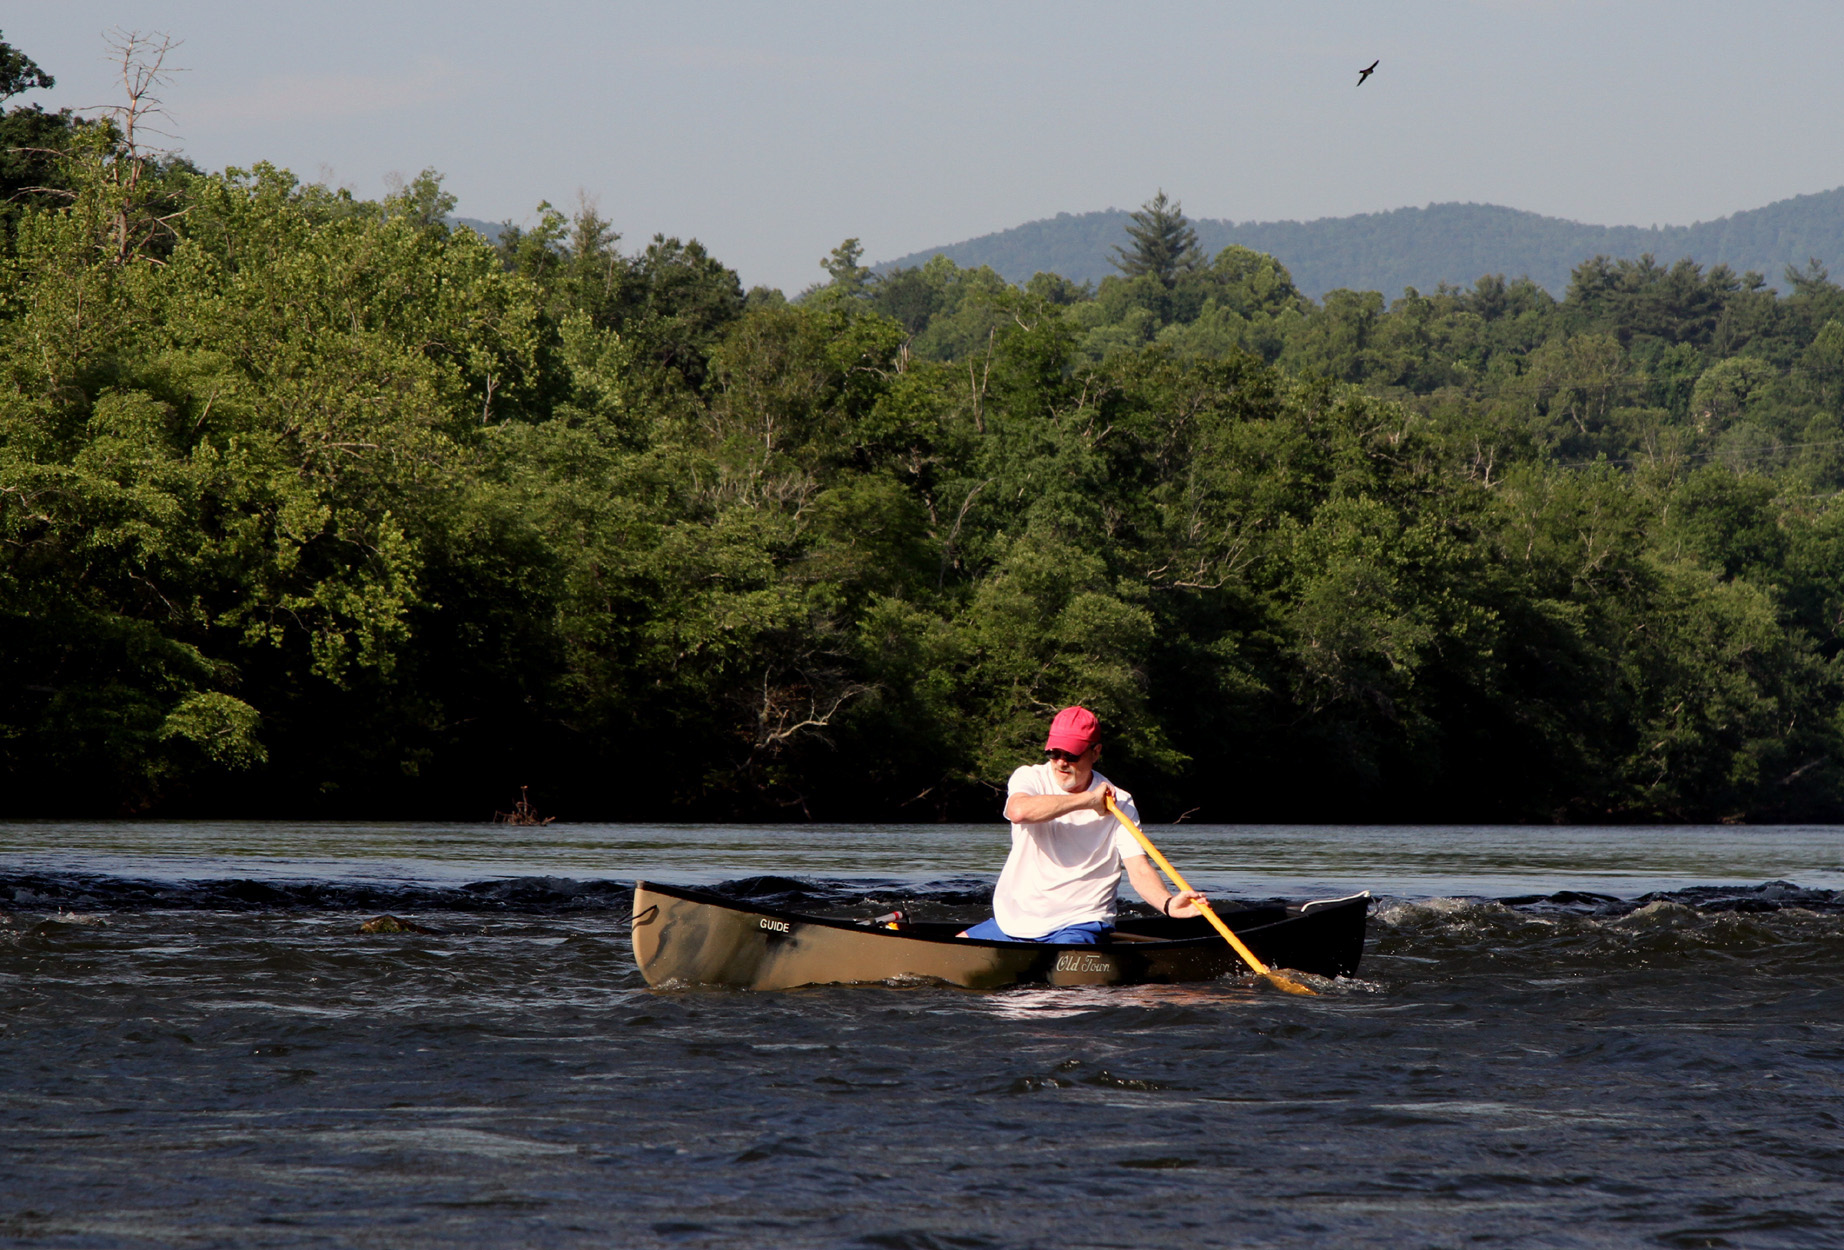 A lone canoer paddles on a river against a forested and mountainous background.